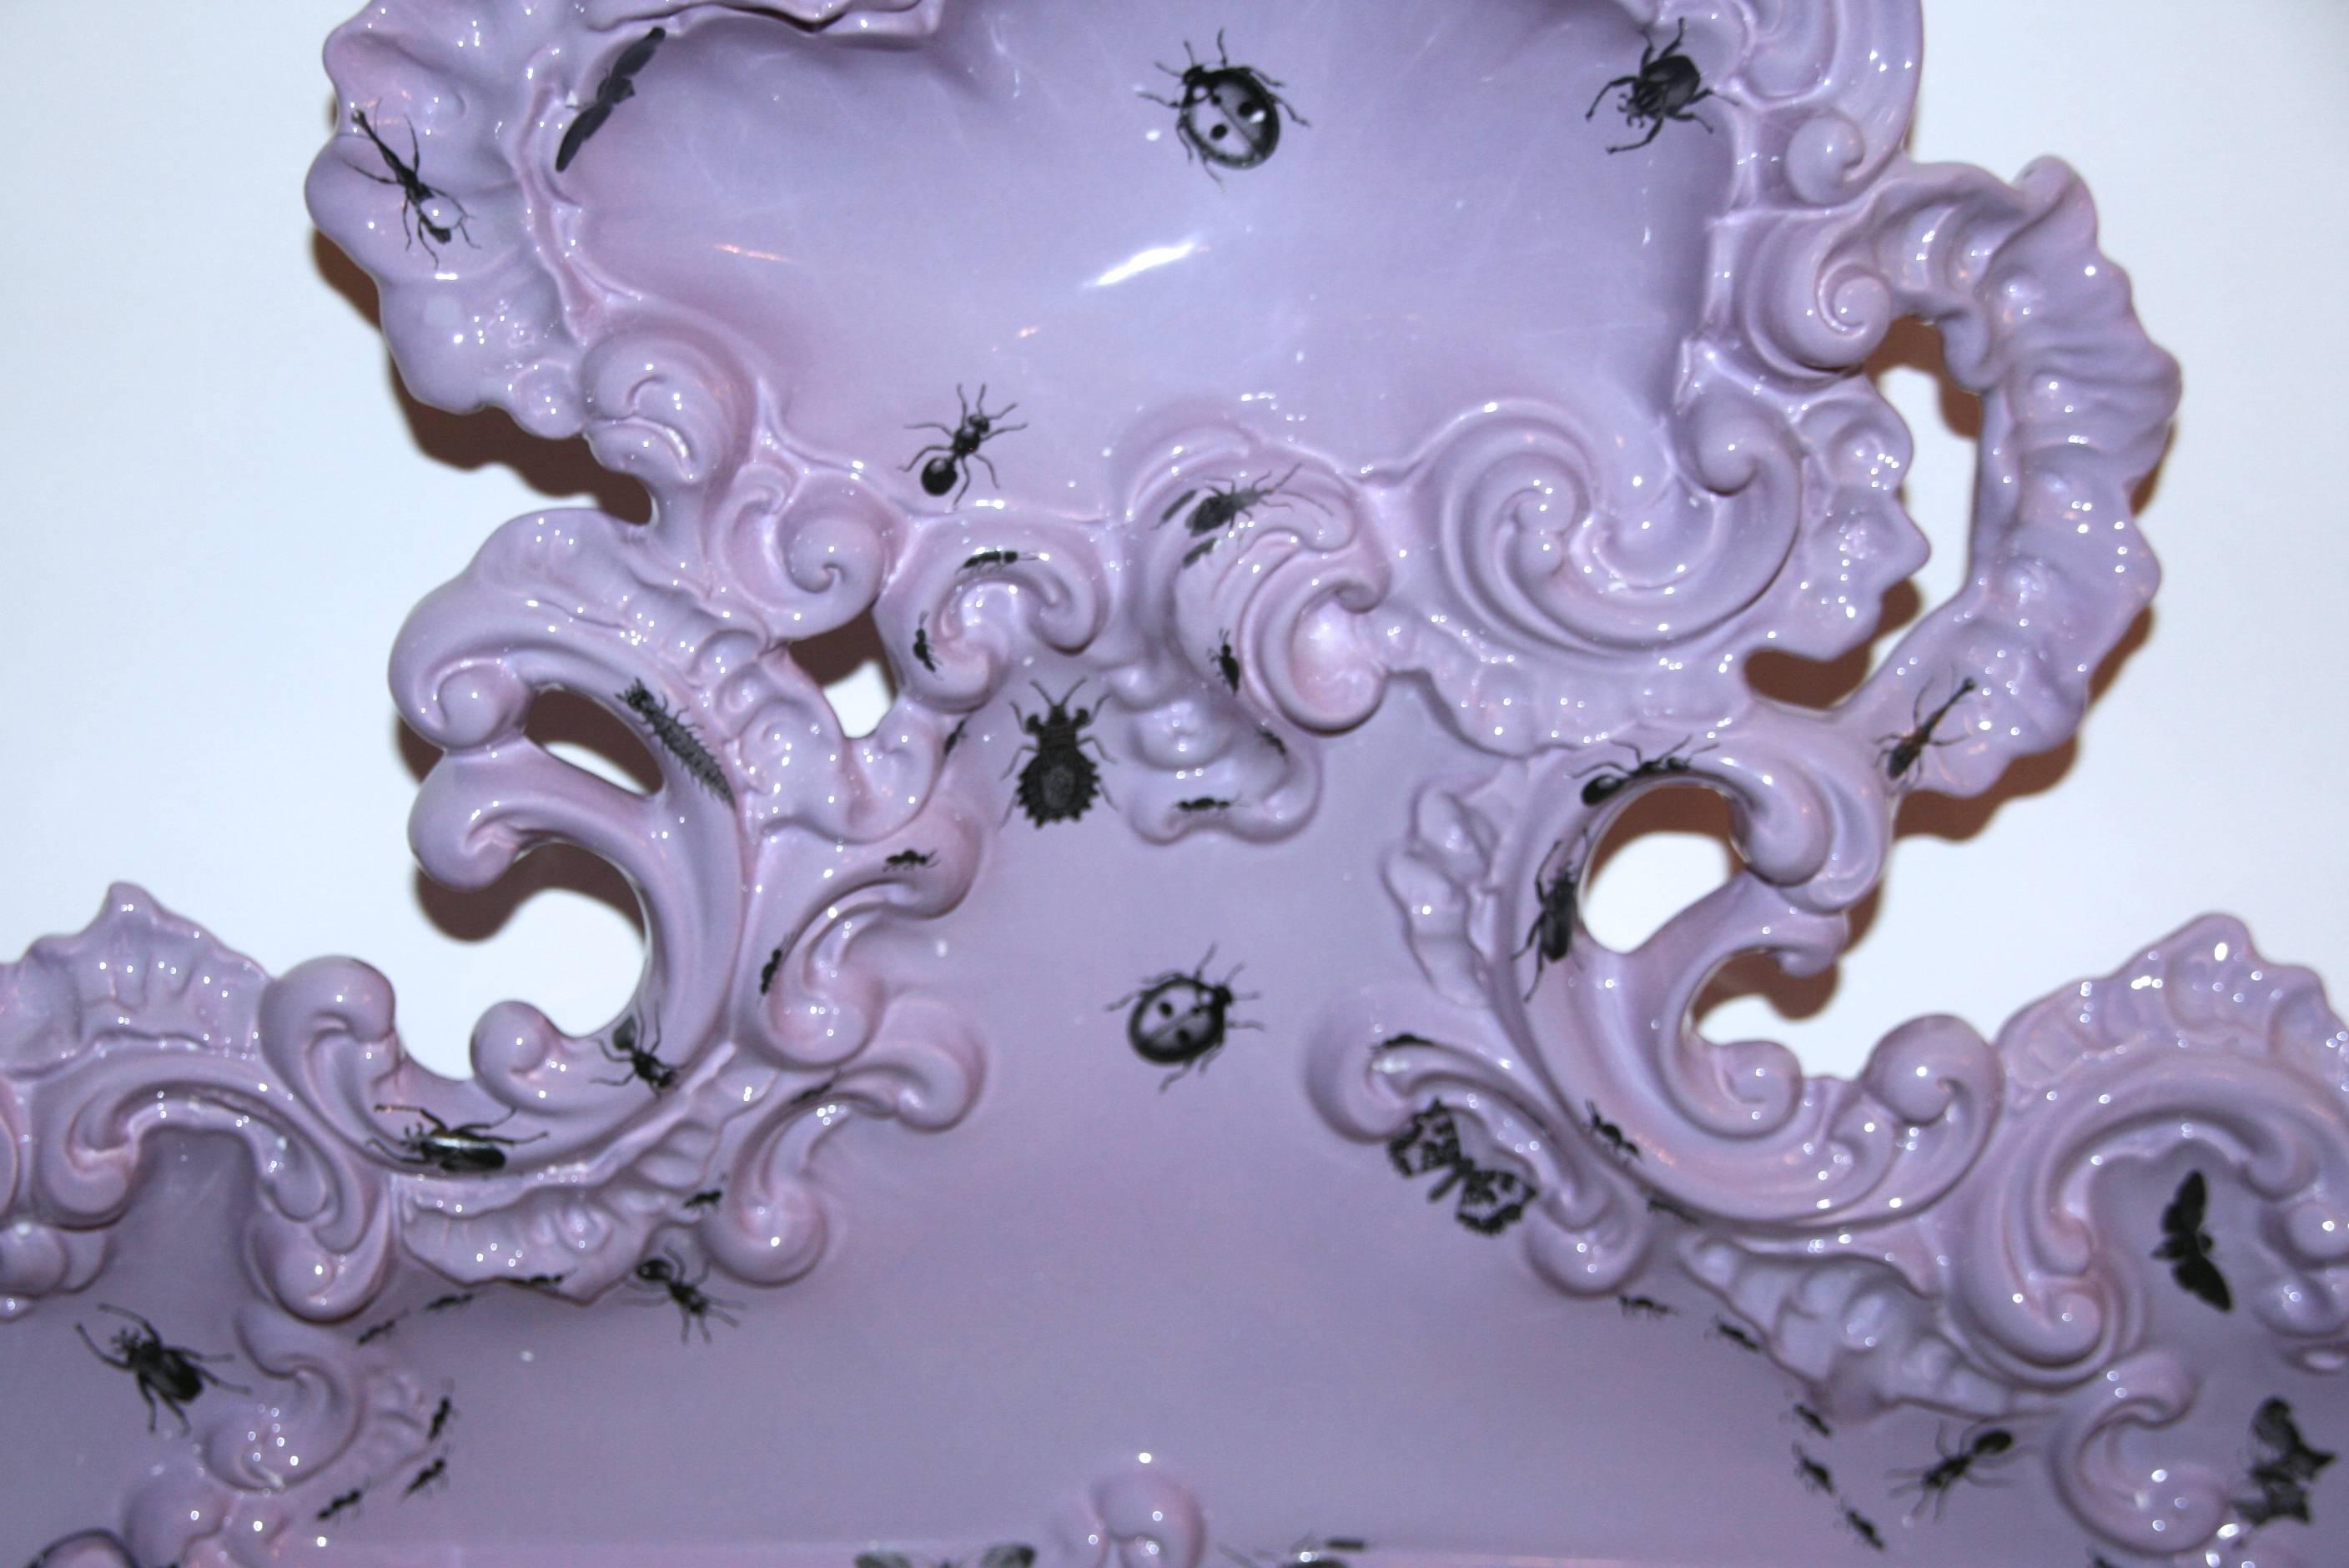 Mid-Century Modern Mirror Decorated with Insects, Furiosa Edition Purple Ceramic, circa 2010, Italy